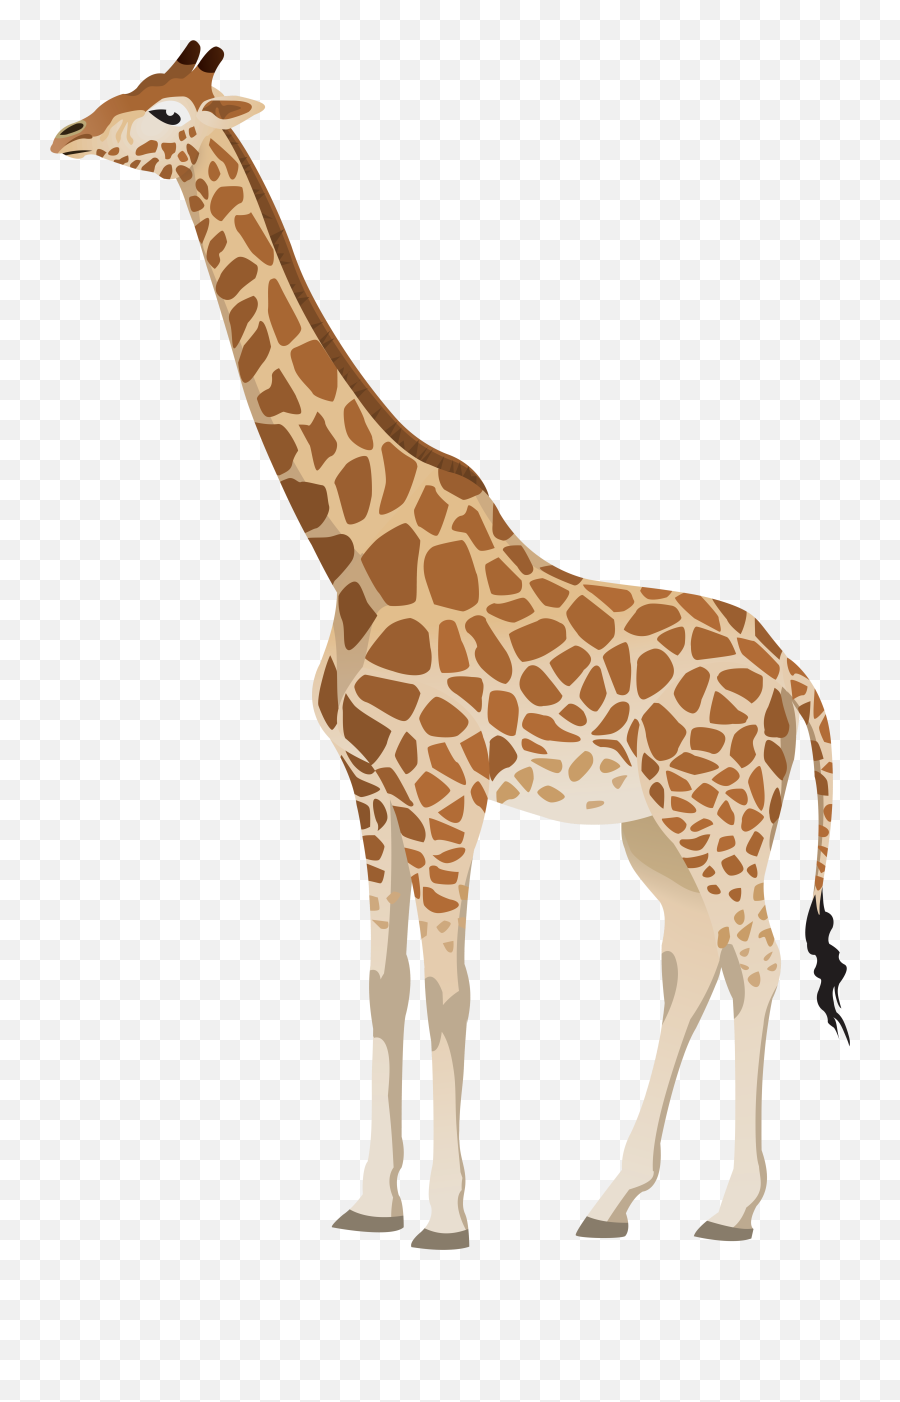 Transparent Background Giraffe Clipart - Transparent Background Giraffe Clipart Emoji,Giraffe Emoji For Iphone